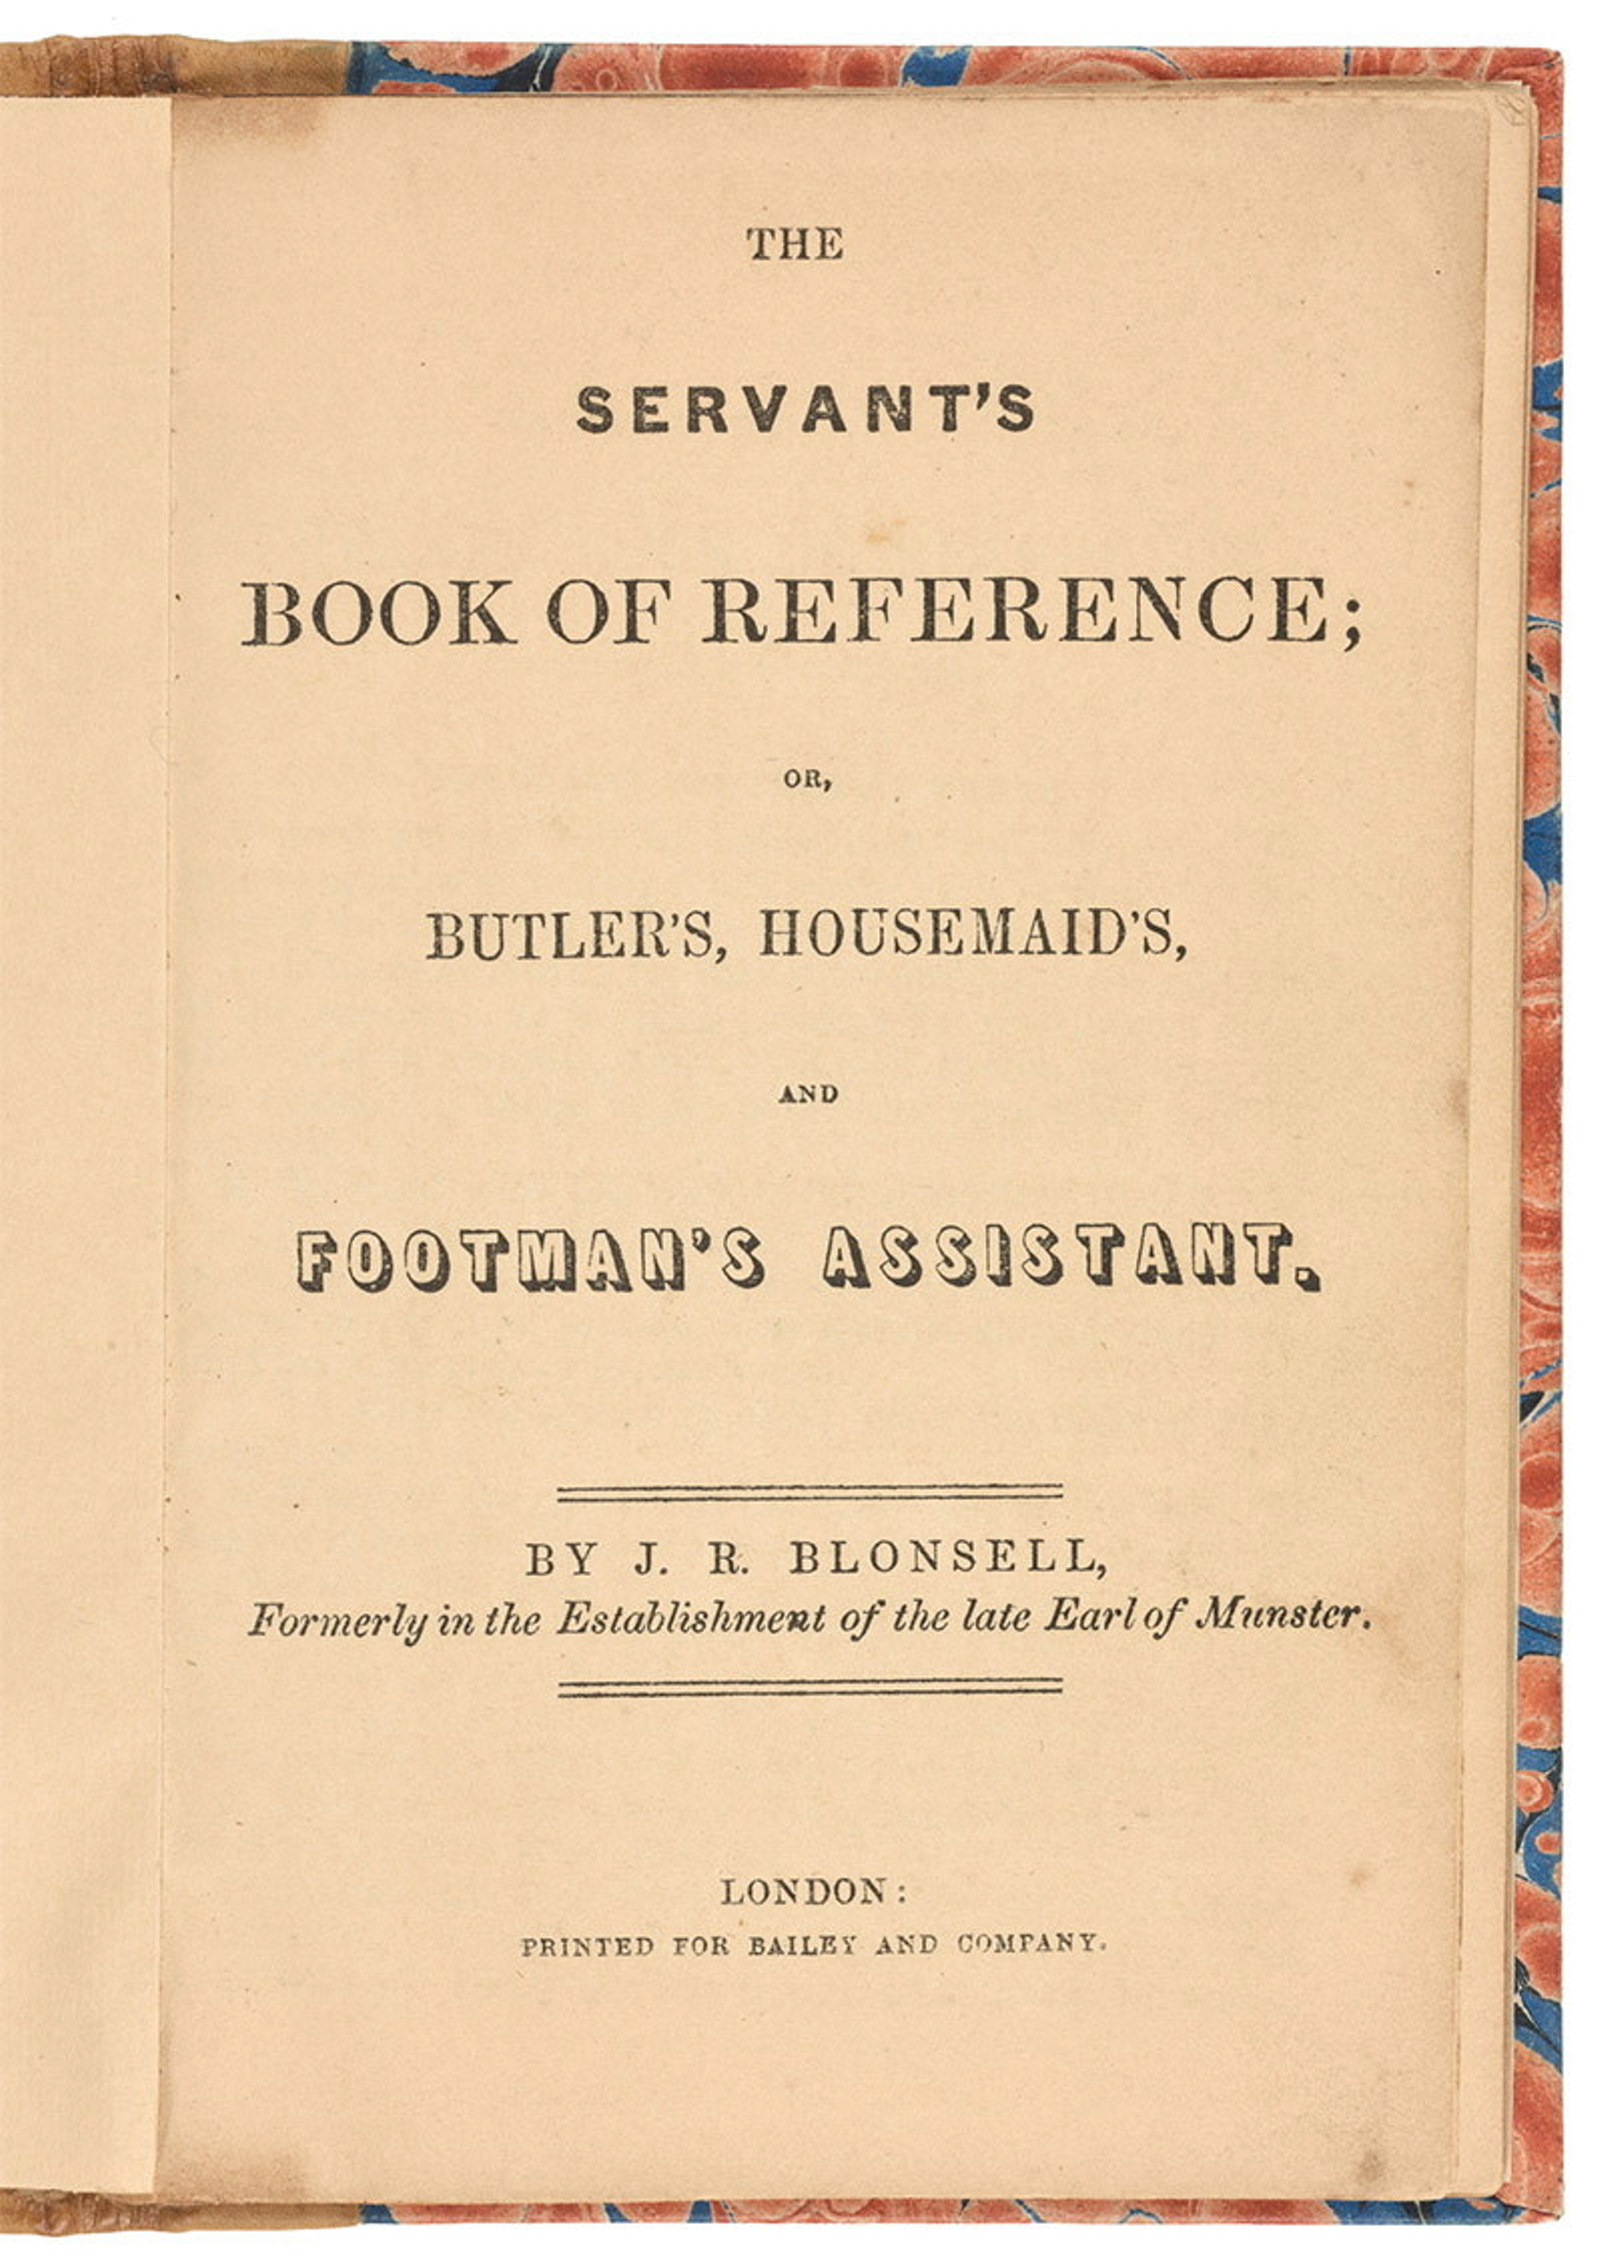 Title page Servants book of reference Blonsell